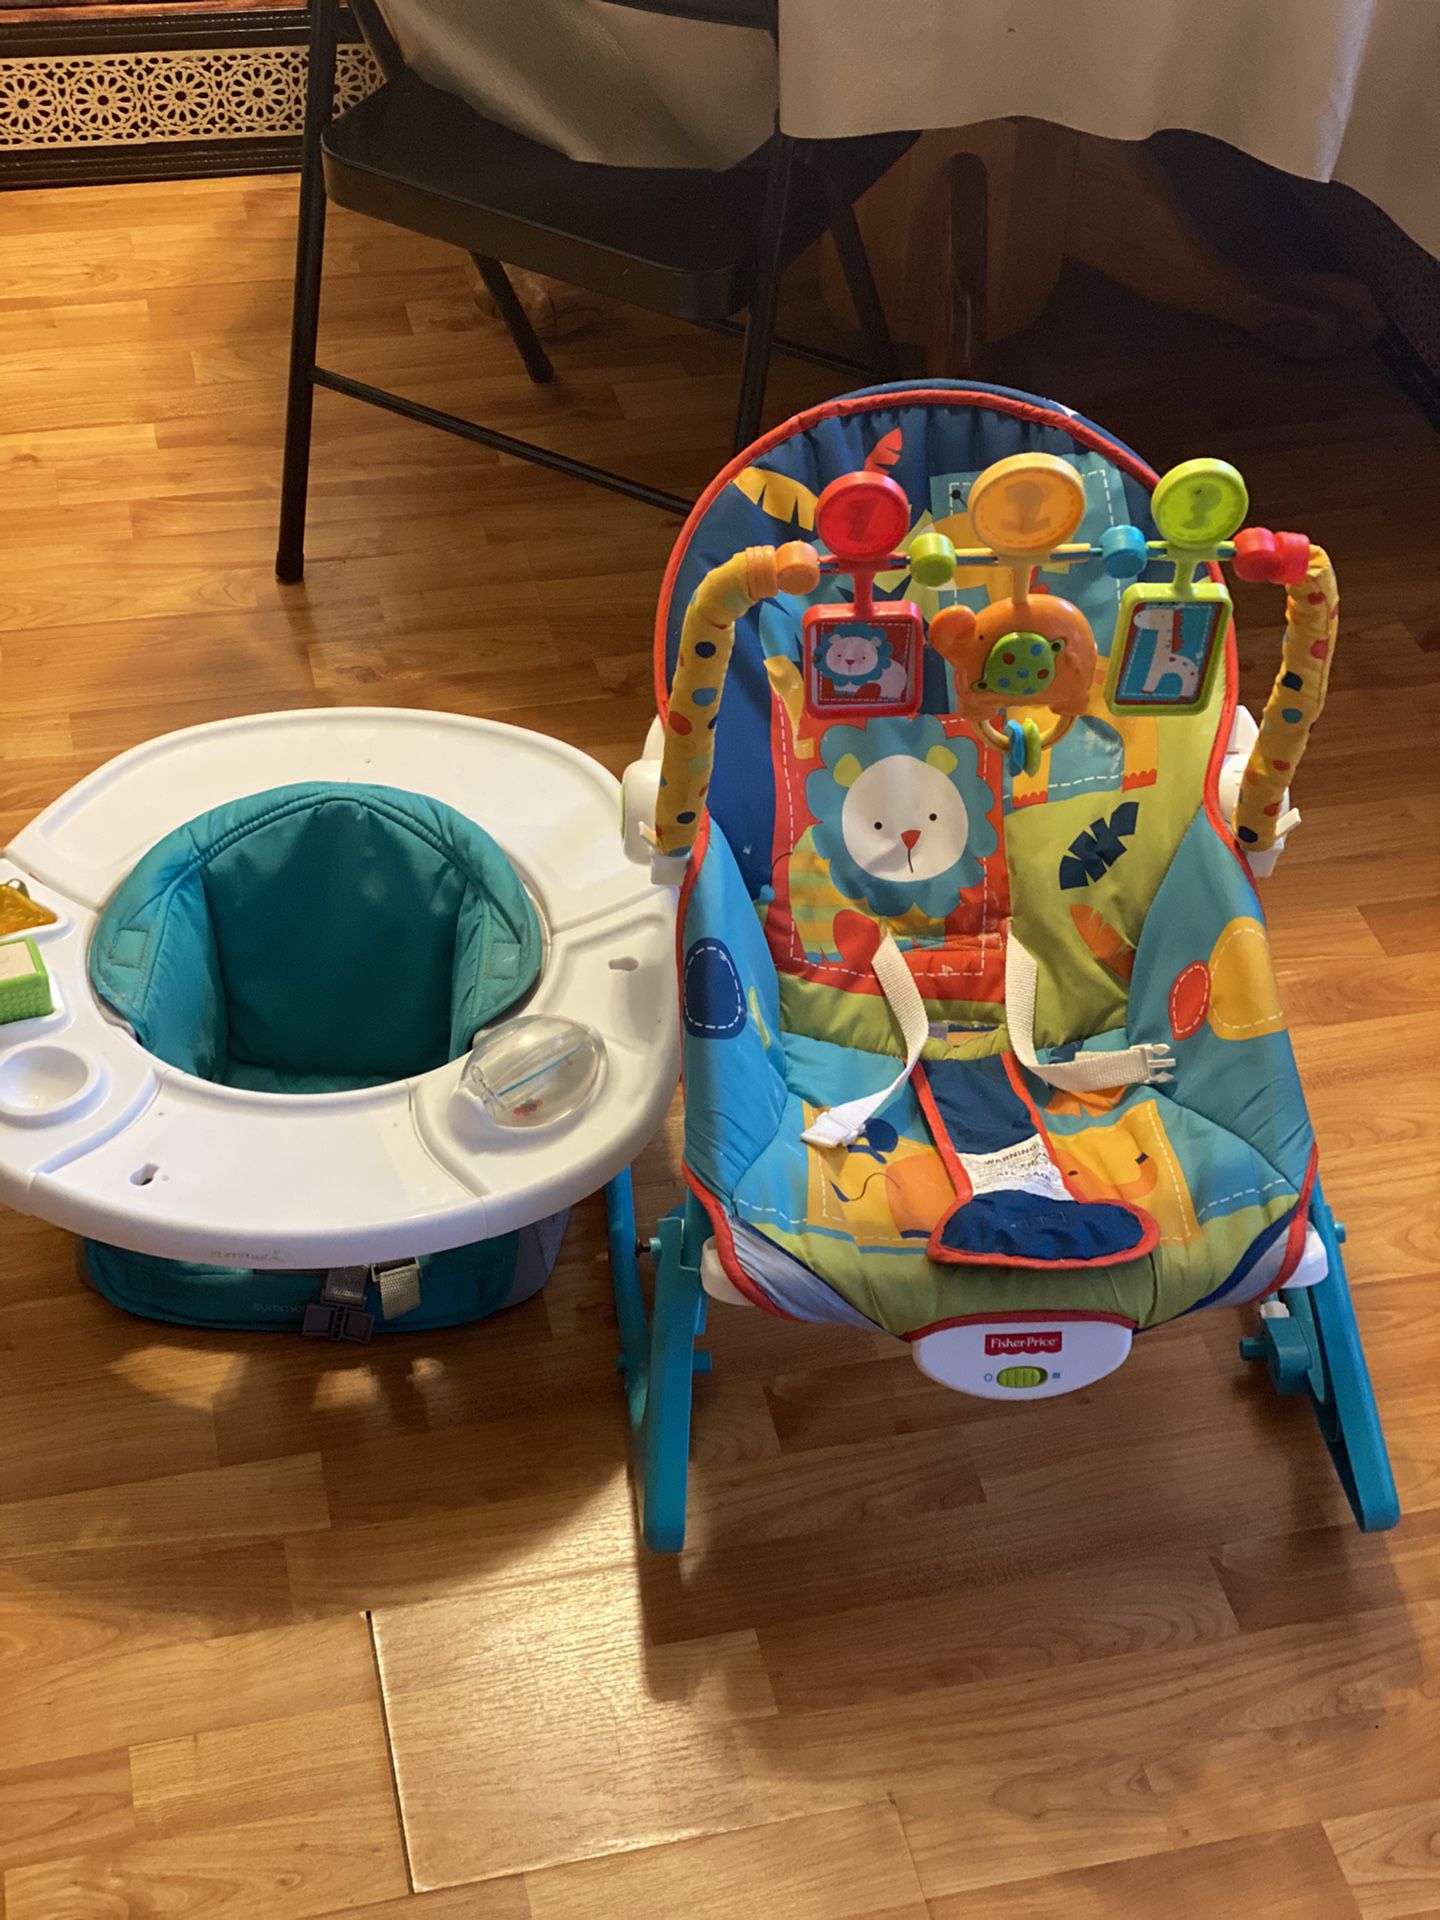 Rocking chair and baby chair